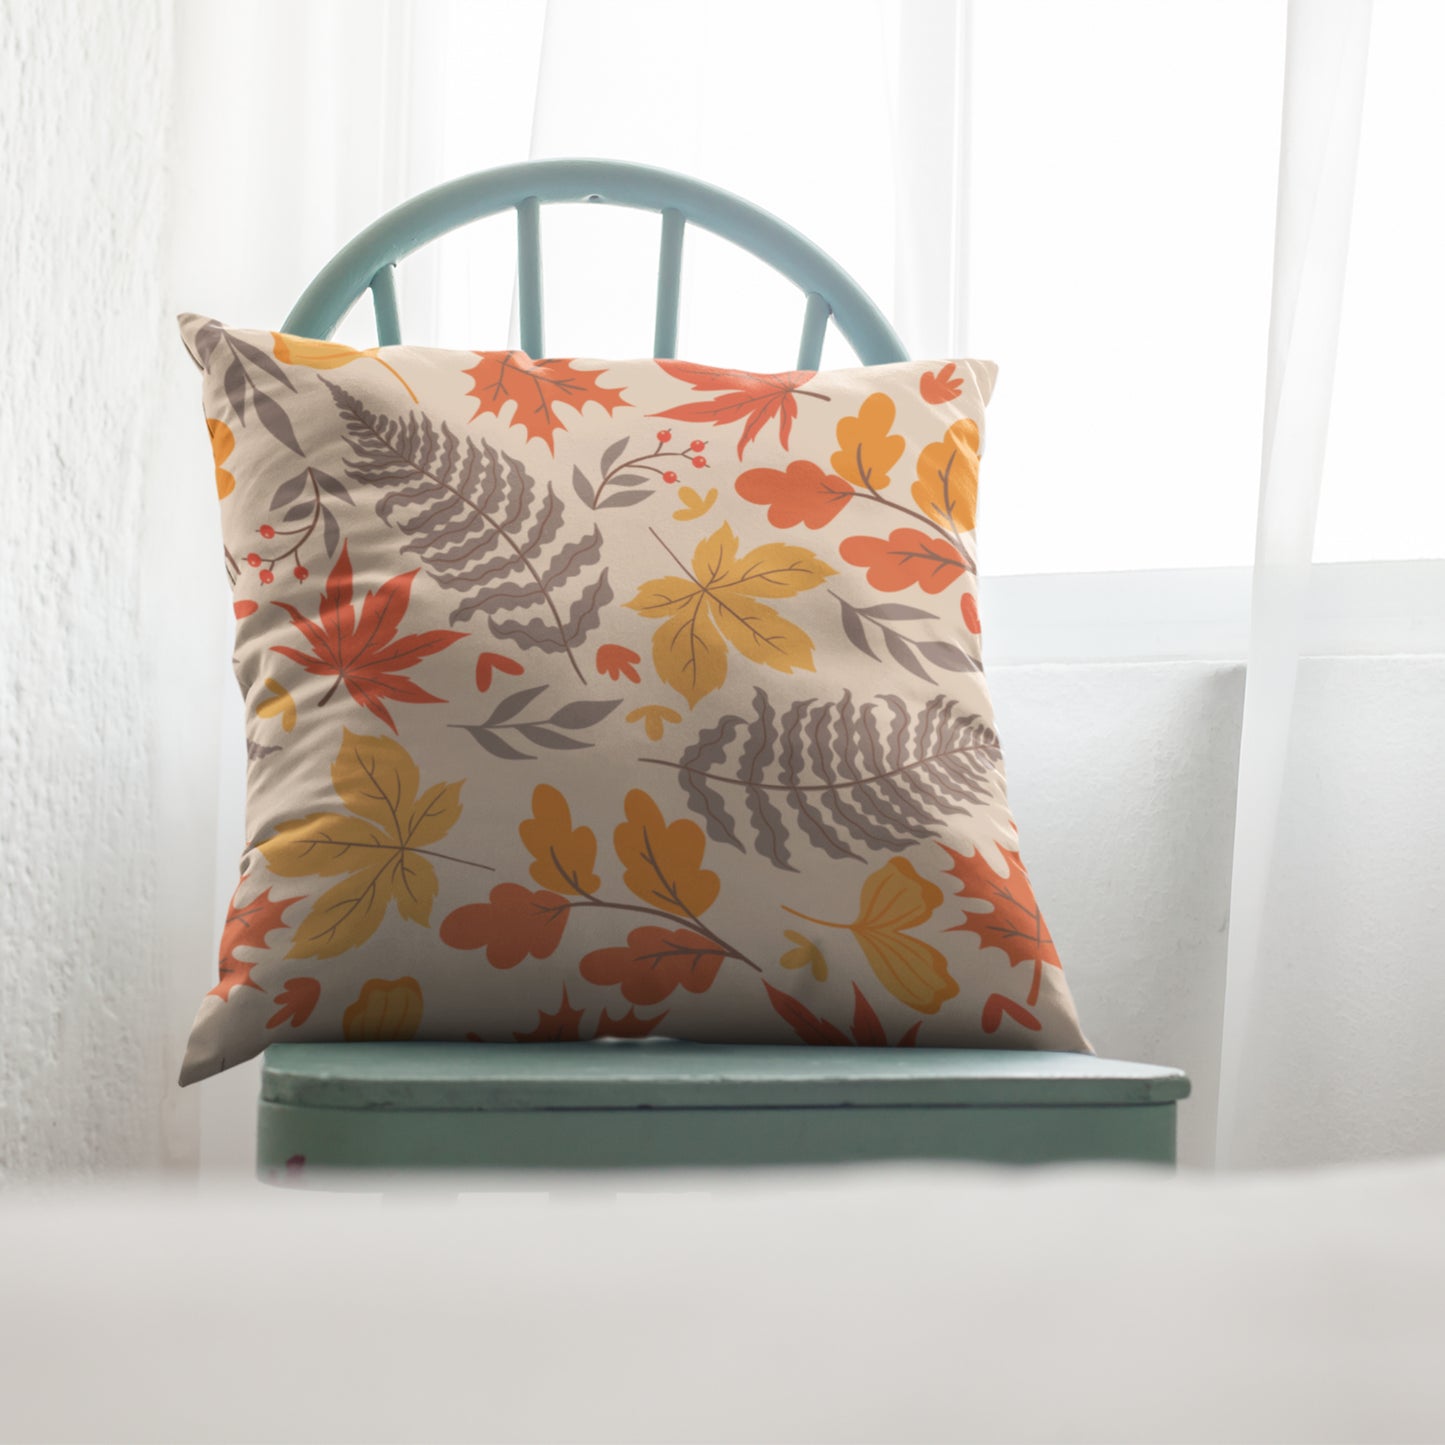 Fall Leaves Printed Cushion Cover, Autumn Home Decor Pillow Case by Homeezone